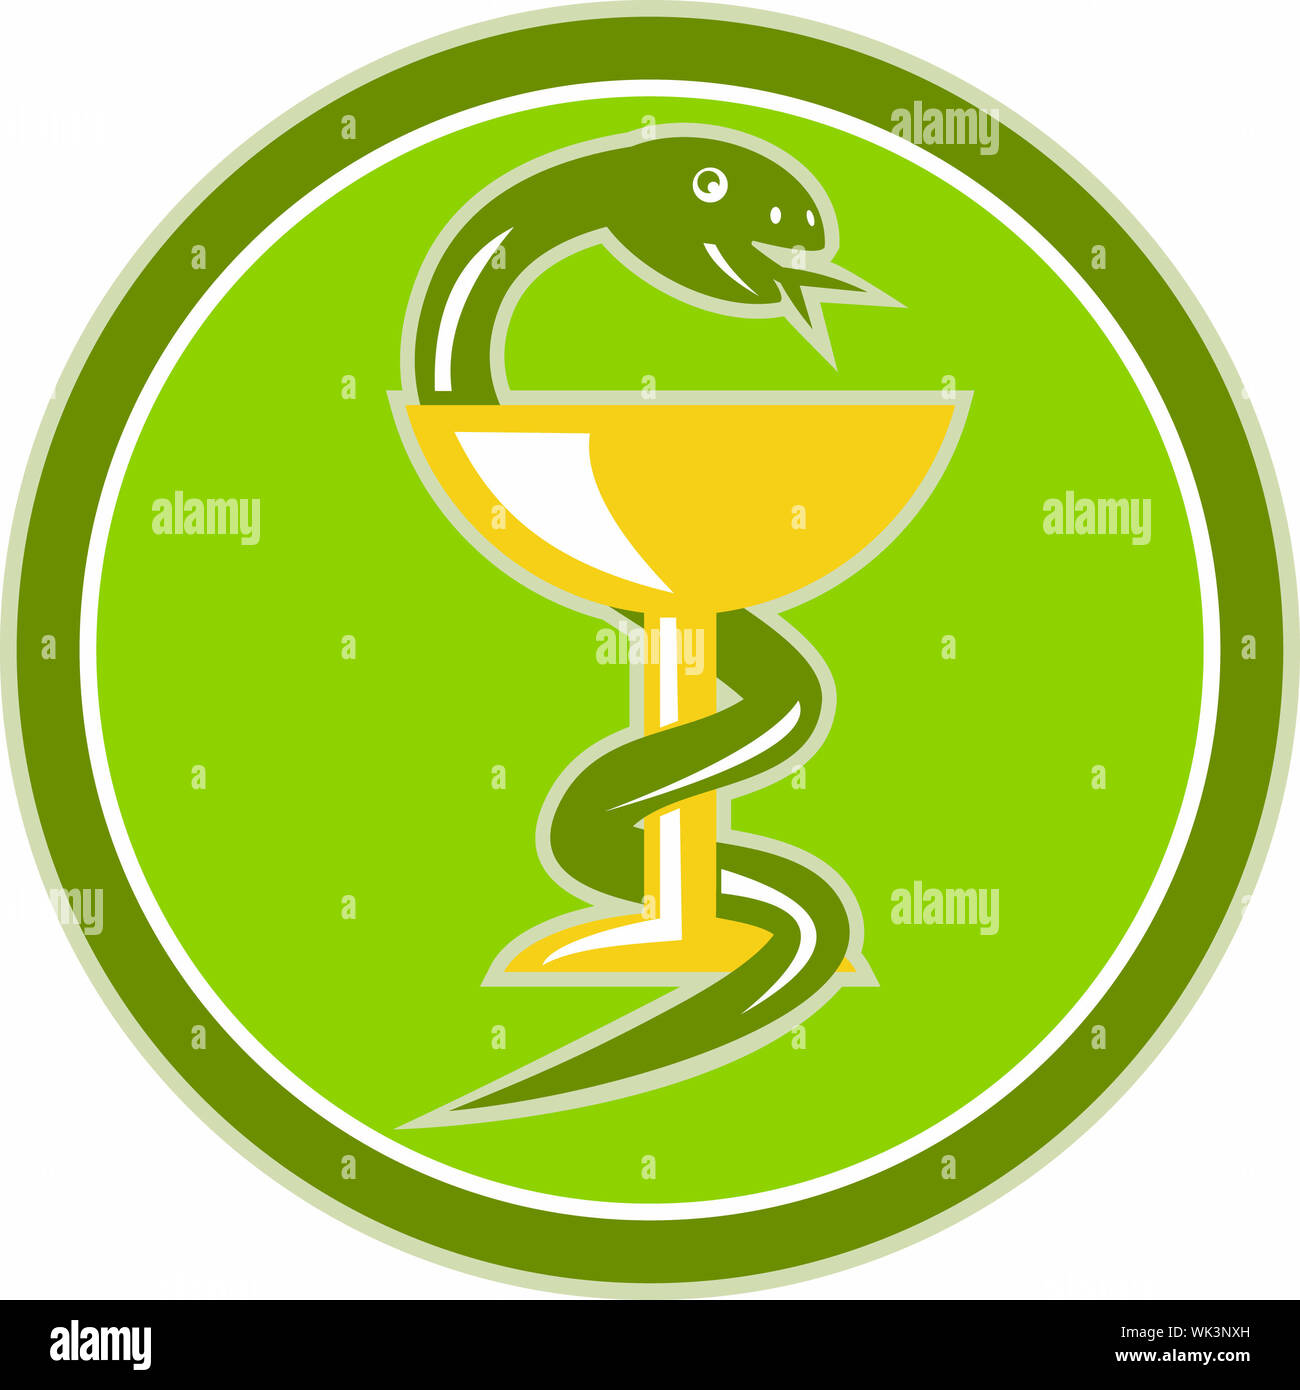 illustration of a snake curling or coiling in cup or wine glass which represents medicine symbol done in retro style Stock Photo